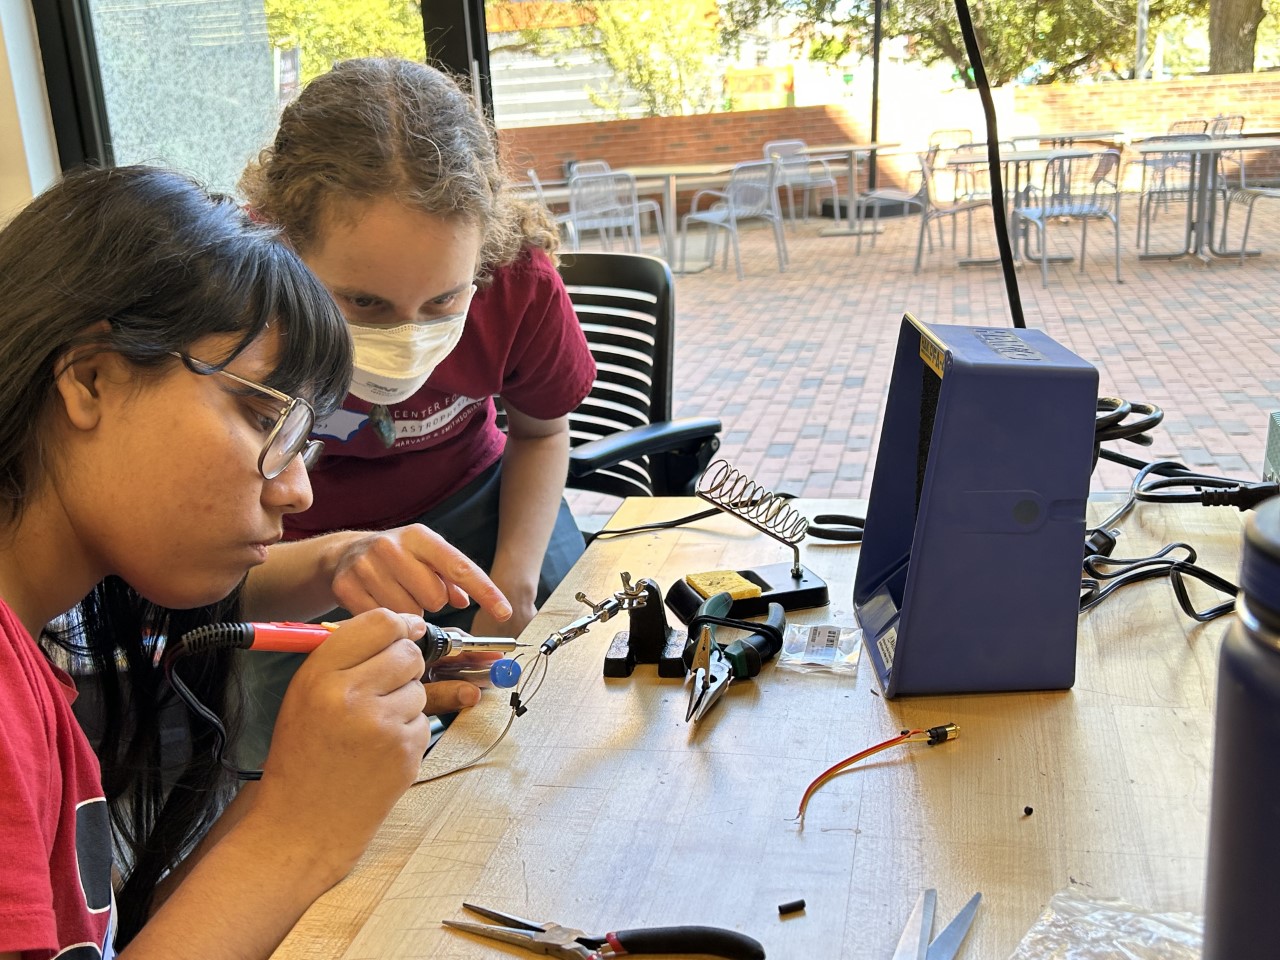 A woman with dirty blond, curly hair in a ponytail pointing to a LightSound component while teaching a female student how to solder at a University of Arizona LightSound workshop.